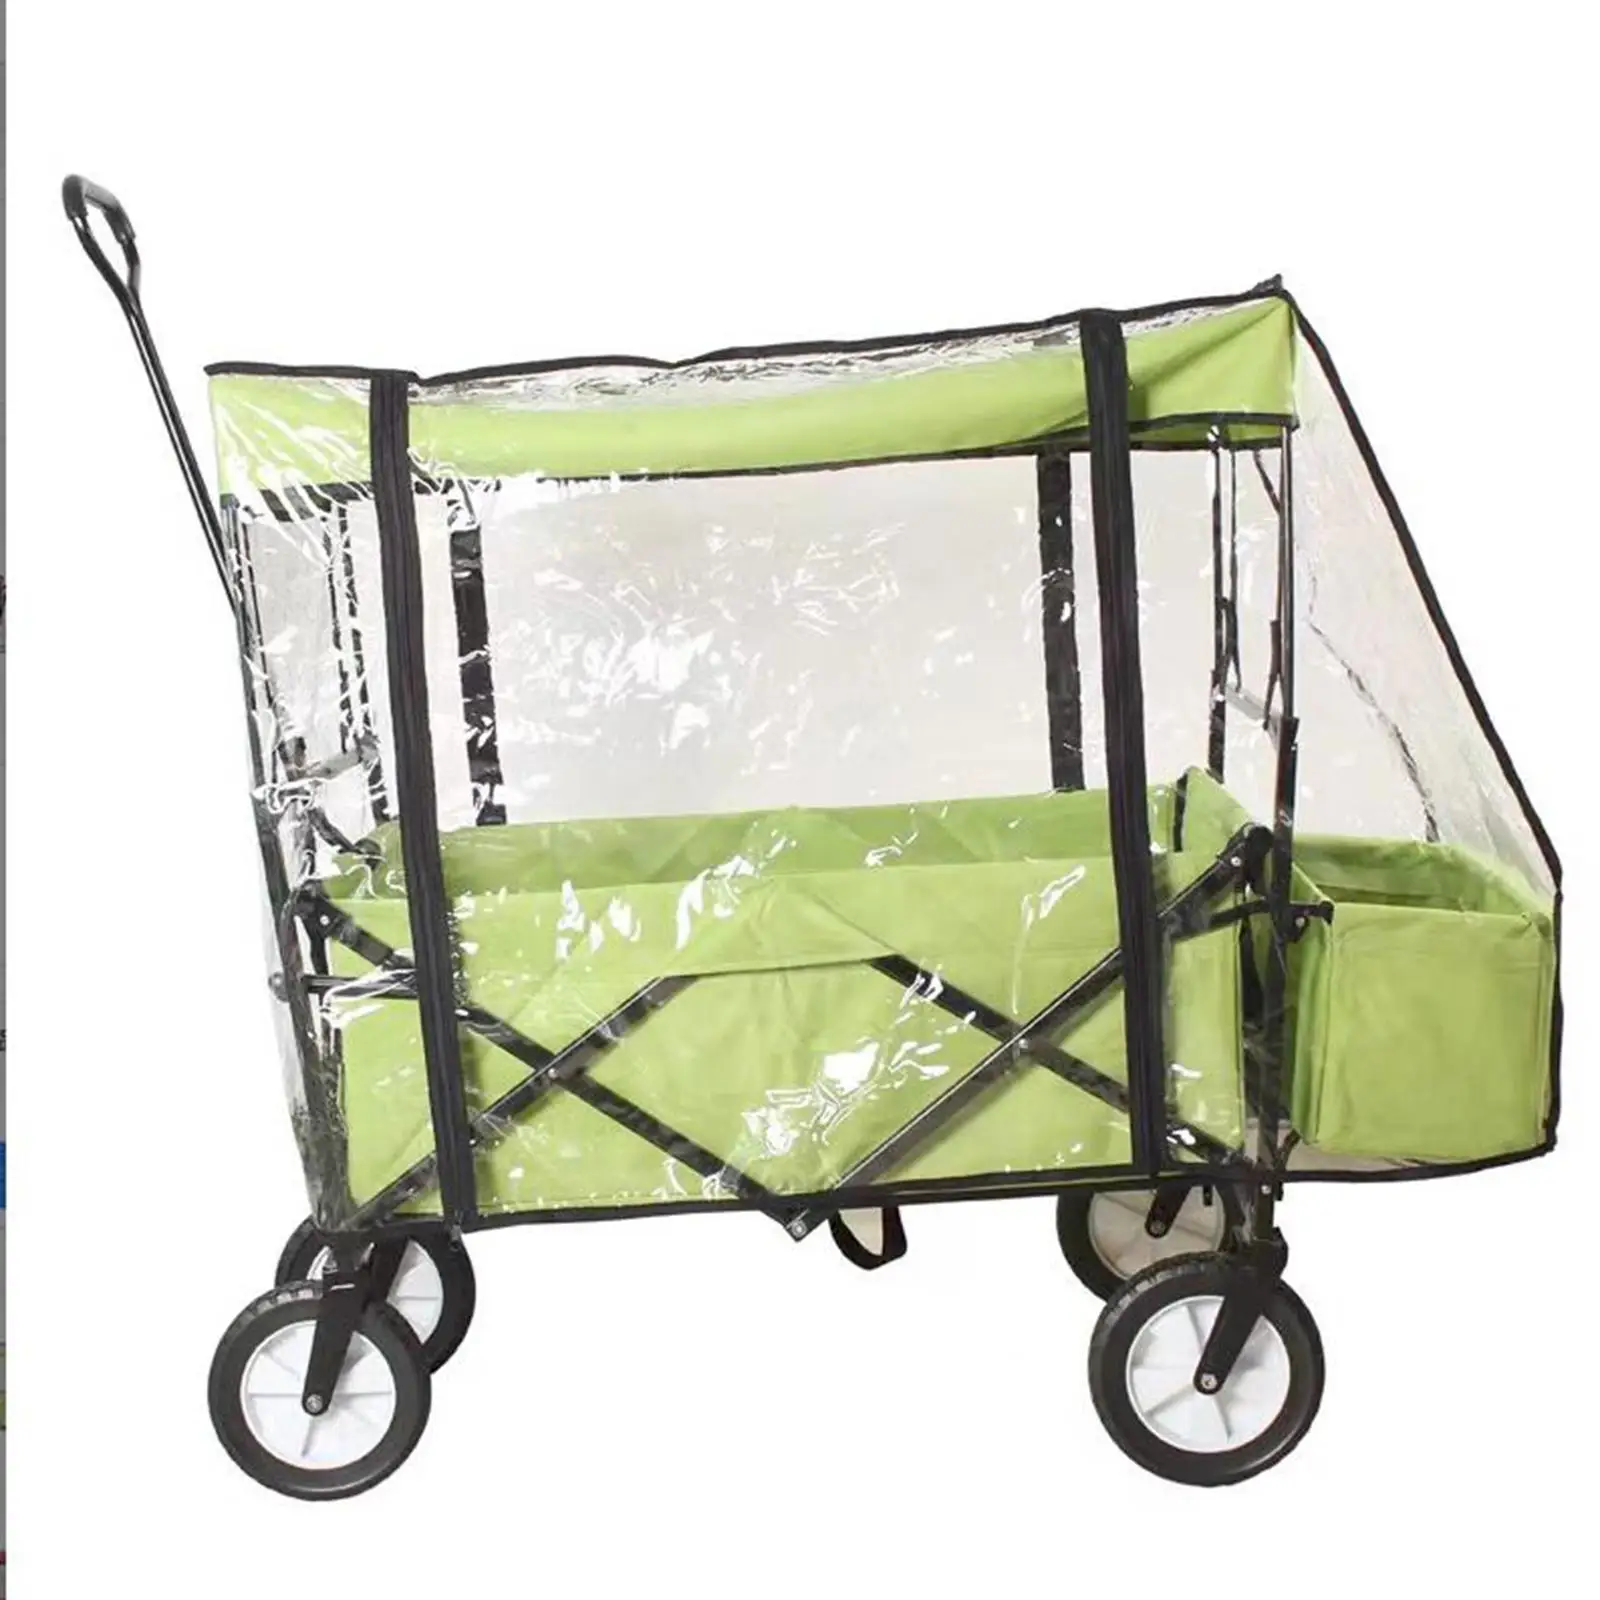 Push Pull Wagon Rain Cover Clear Trolley Cart Cover for Outdoor Garden